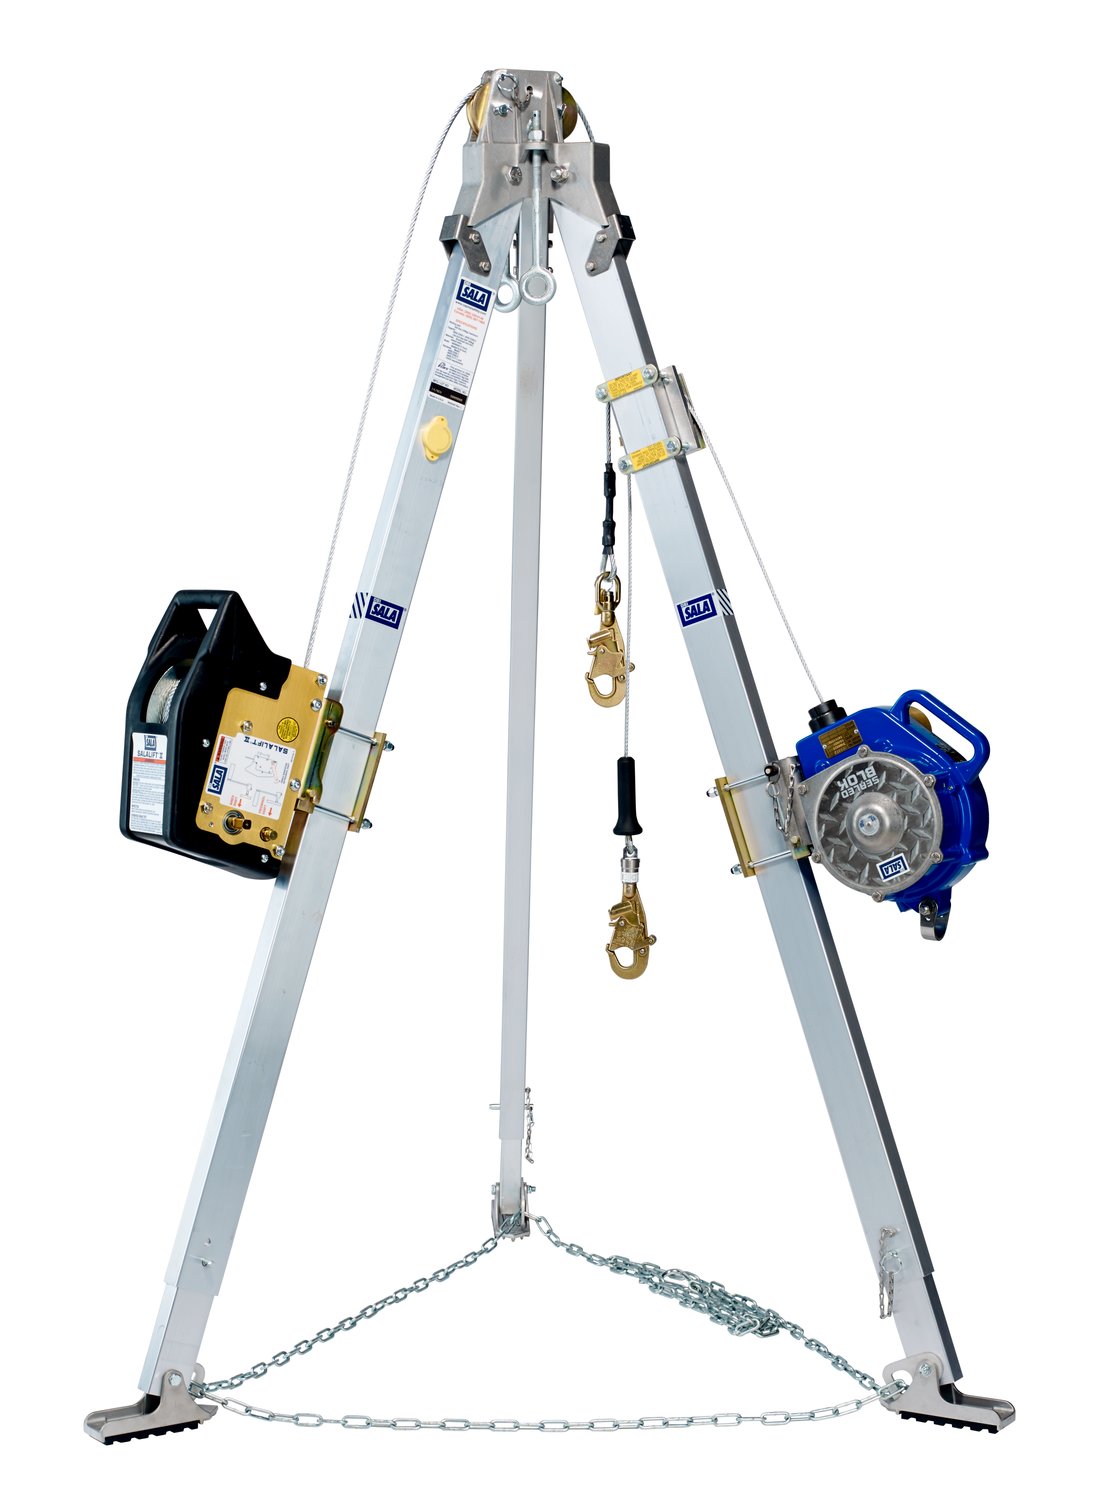 7012820475 - 3M DBI-SALA Confined Space Aluminum Tripod with Winch and 3-Way SRL 8301044, 9 ft High, 60 ft and 50 ft Stainless Steel Cable